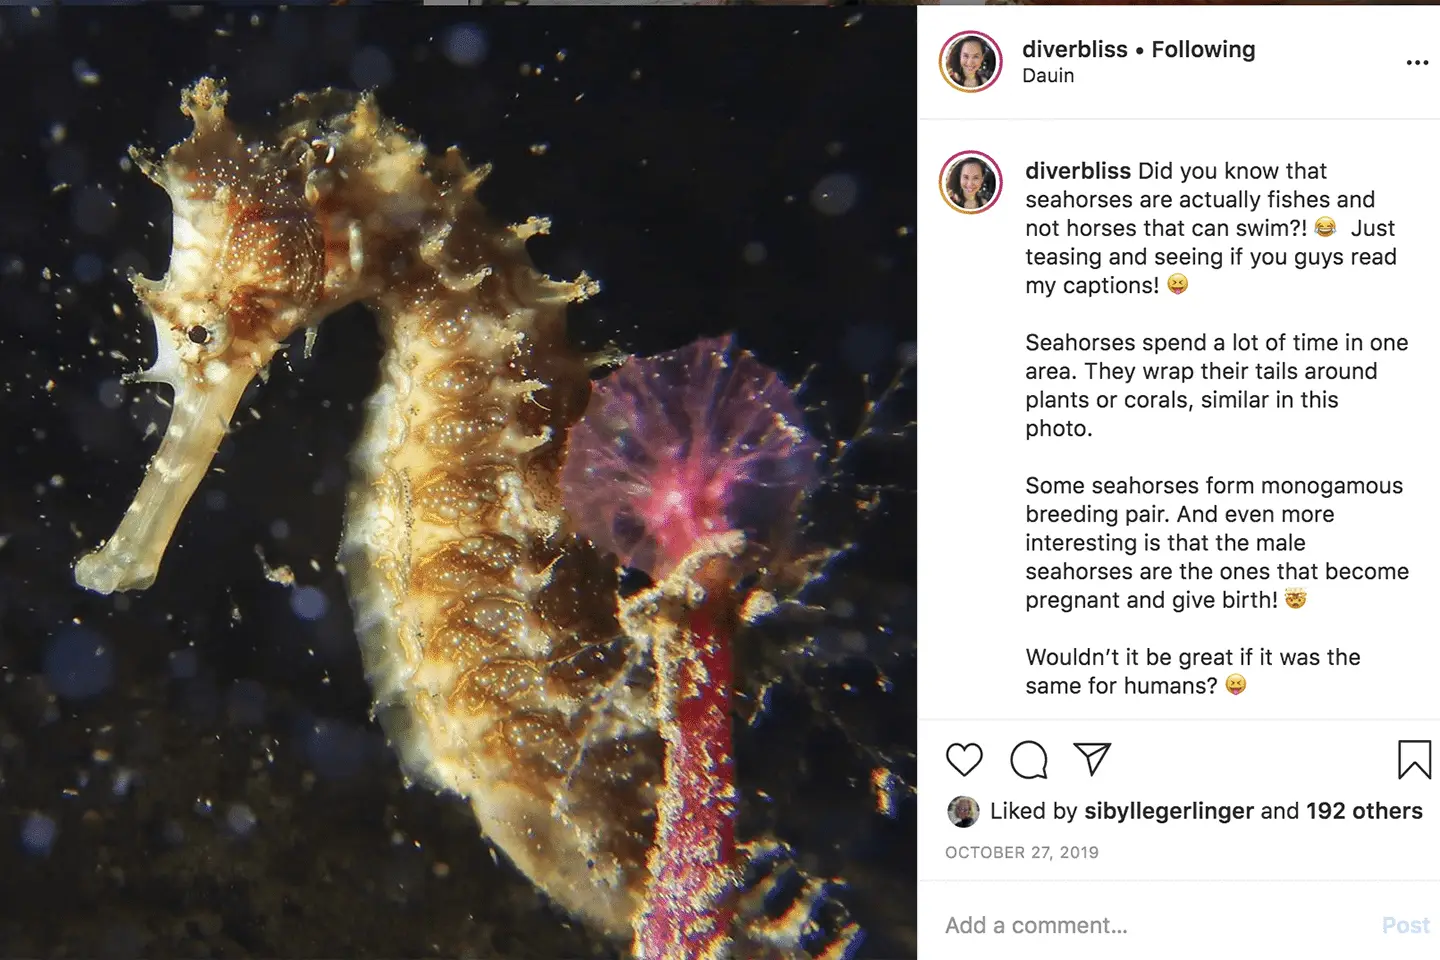 Lengthy instagram captions work as well for engagement with other ocean advocates